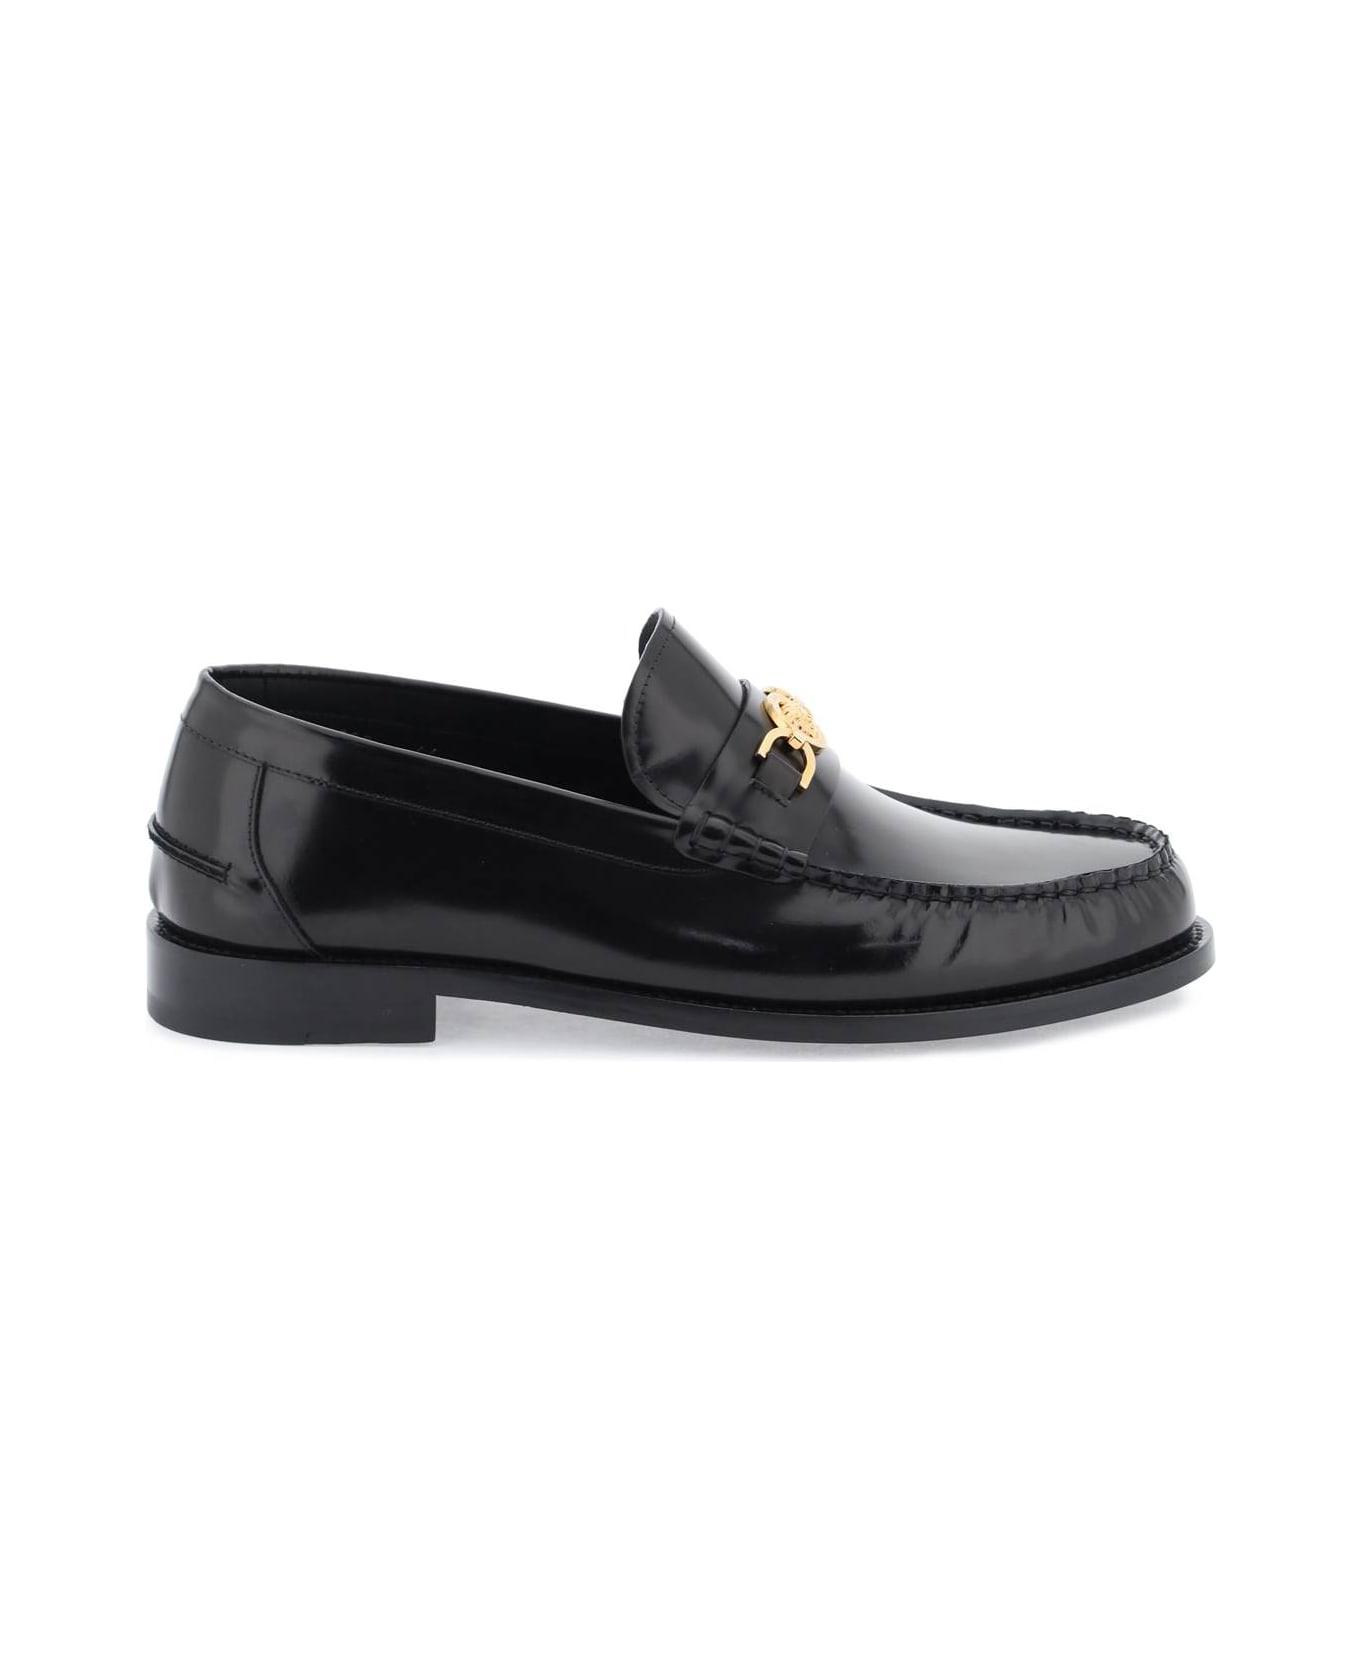 Versace Black Leather Loafers - Black/versace Gold